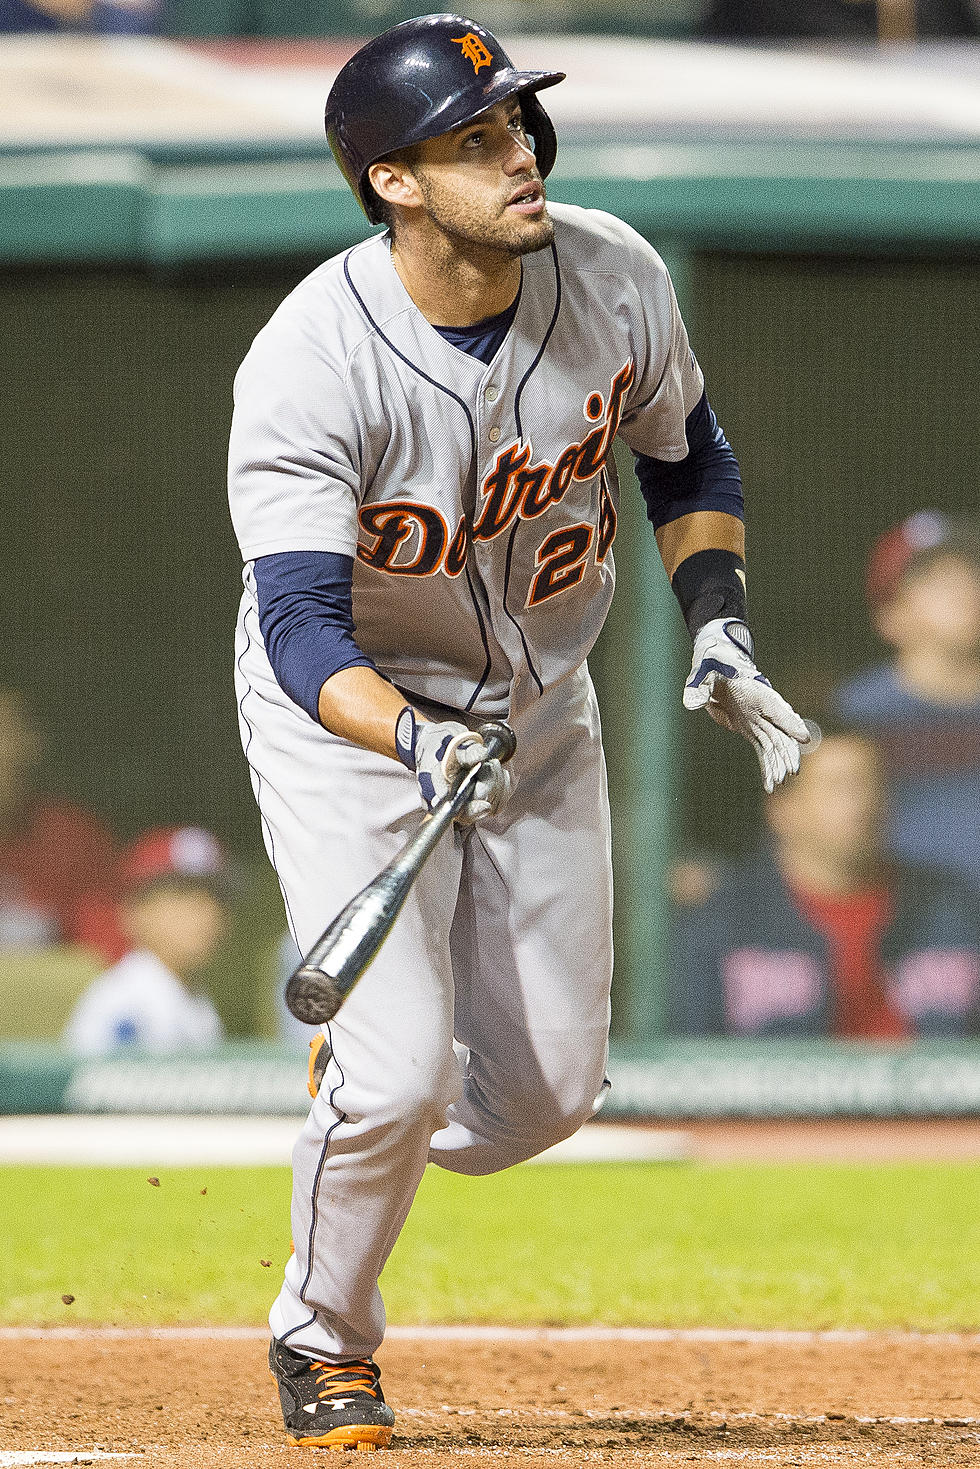 Tigers Hold Off Tribe Rally, Win 6-4